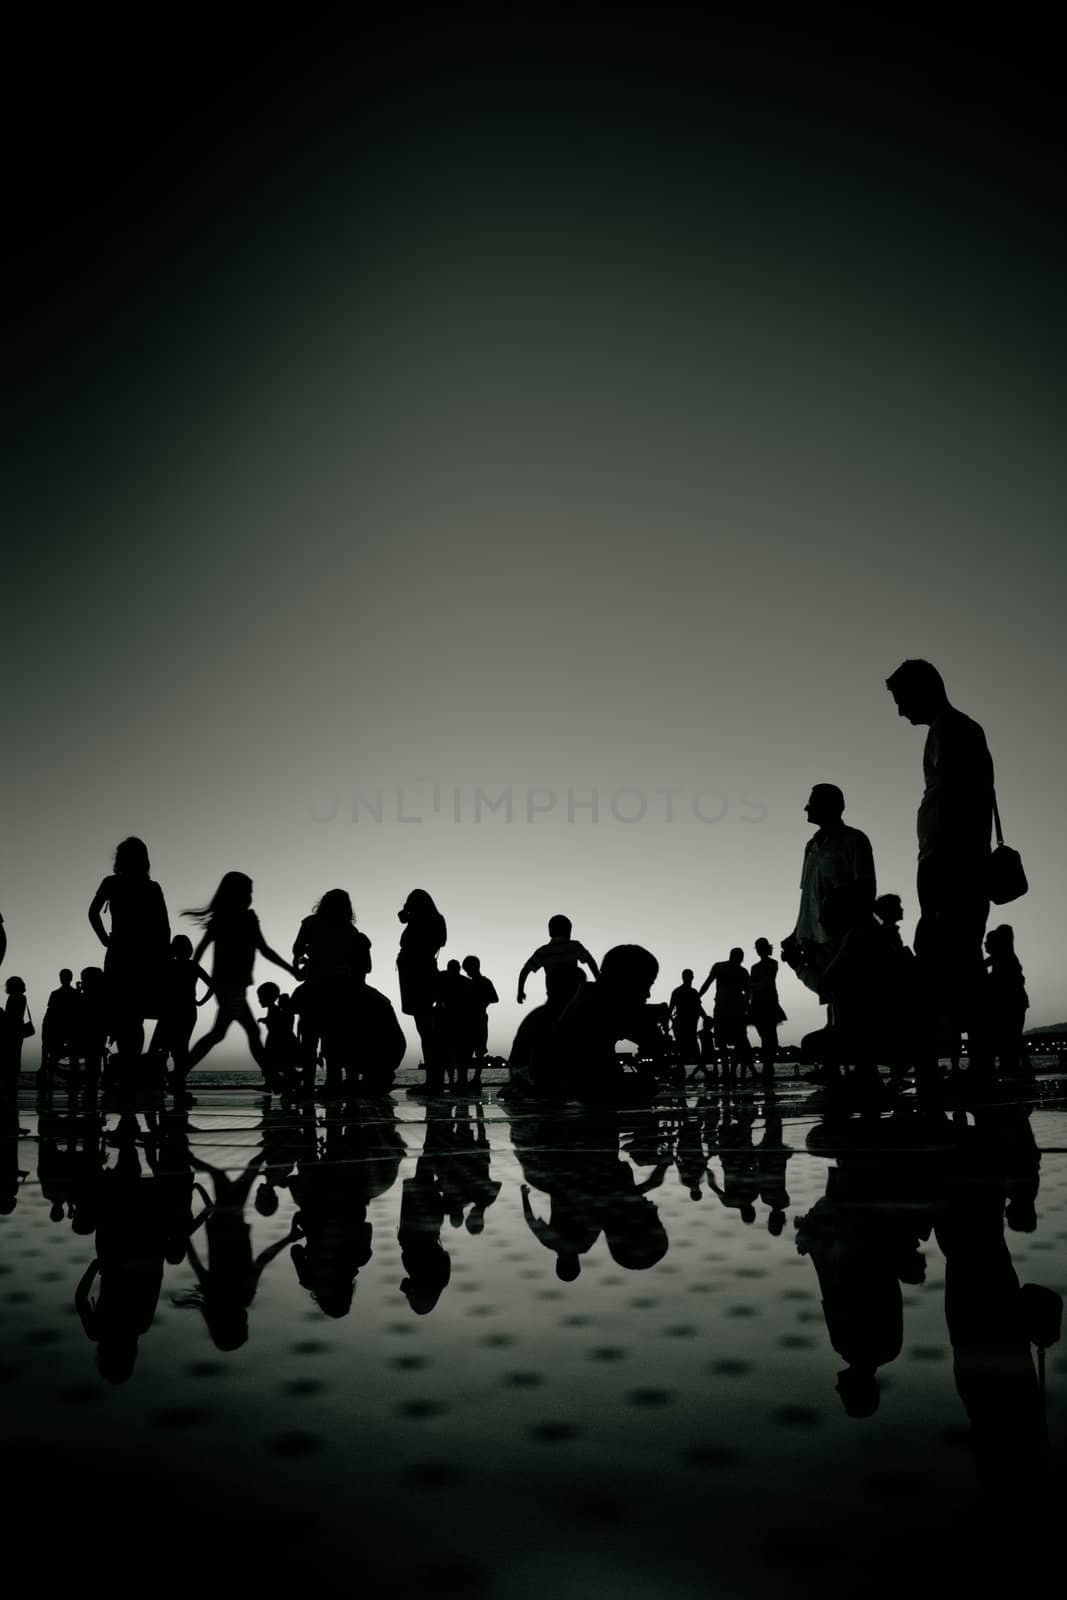 People silhouette reflections black and white by xbrchx